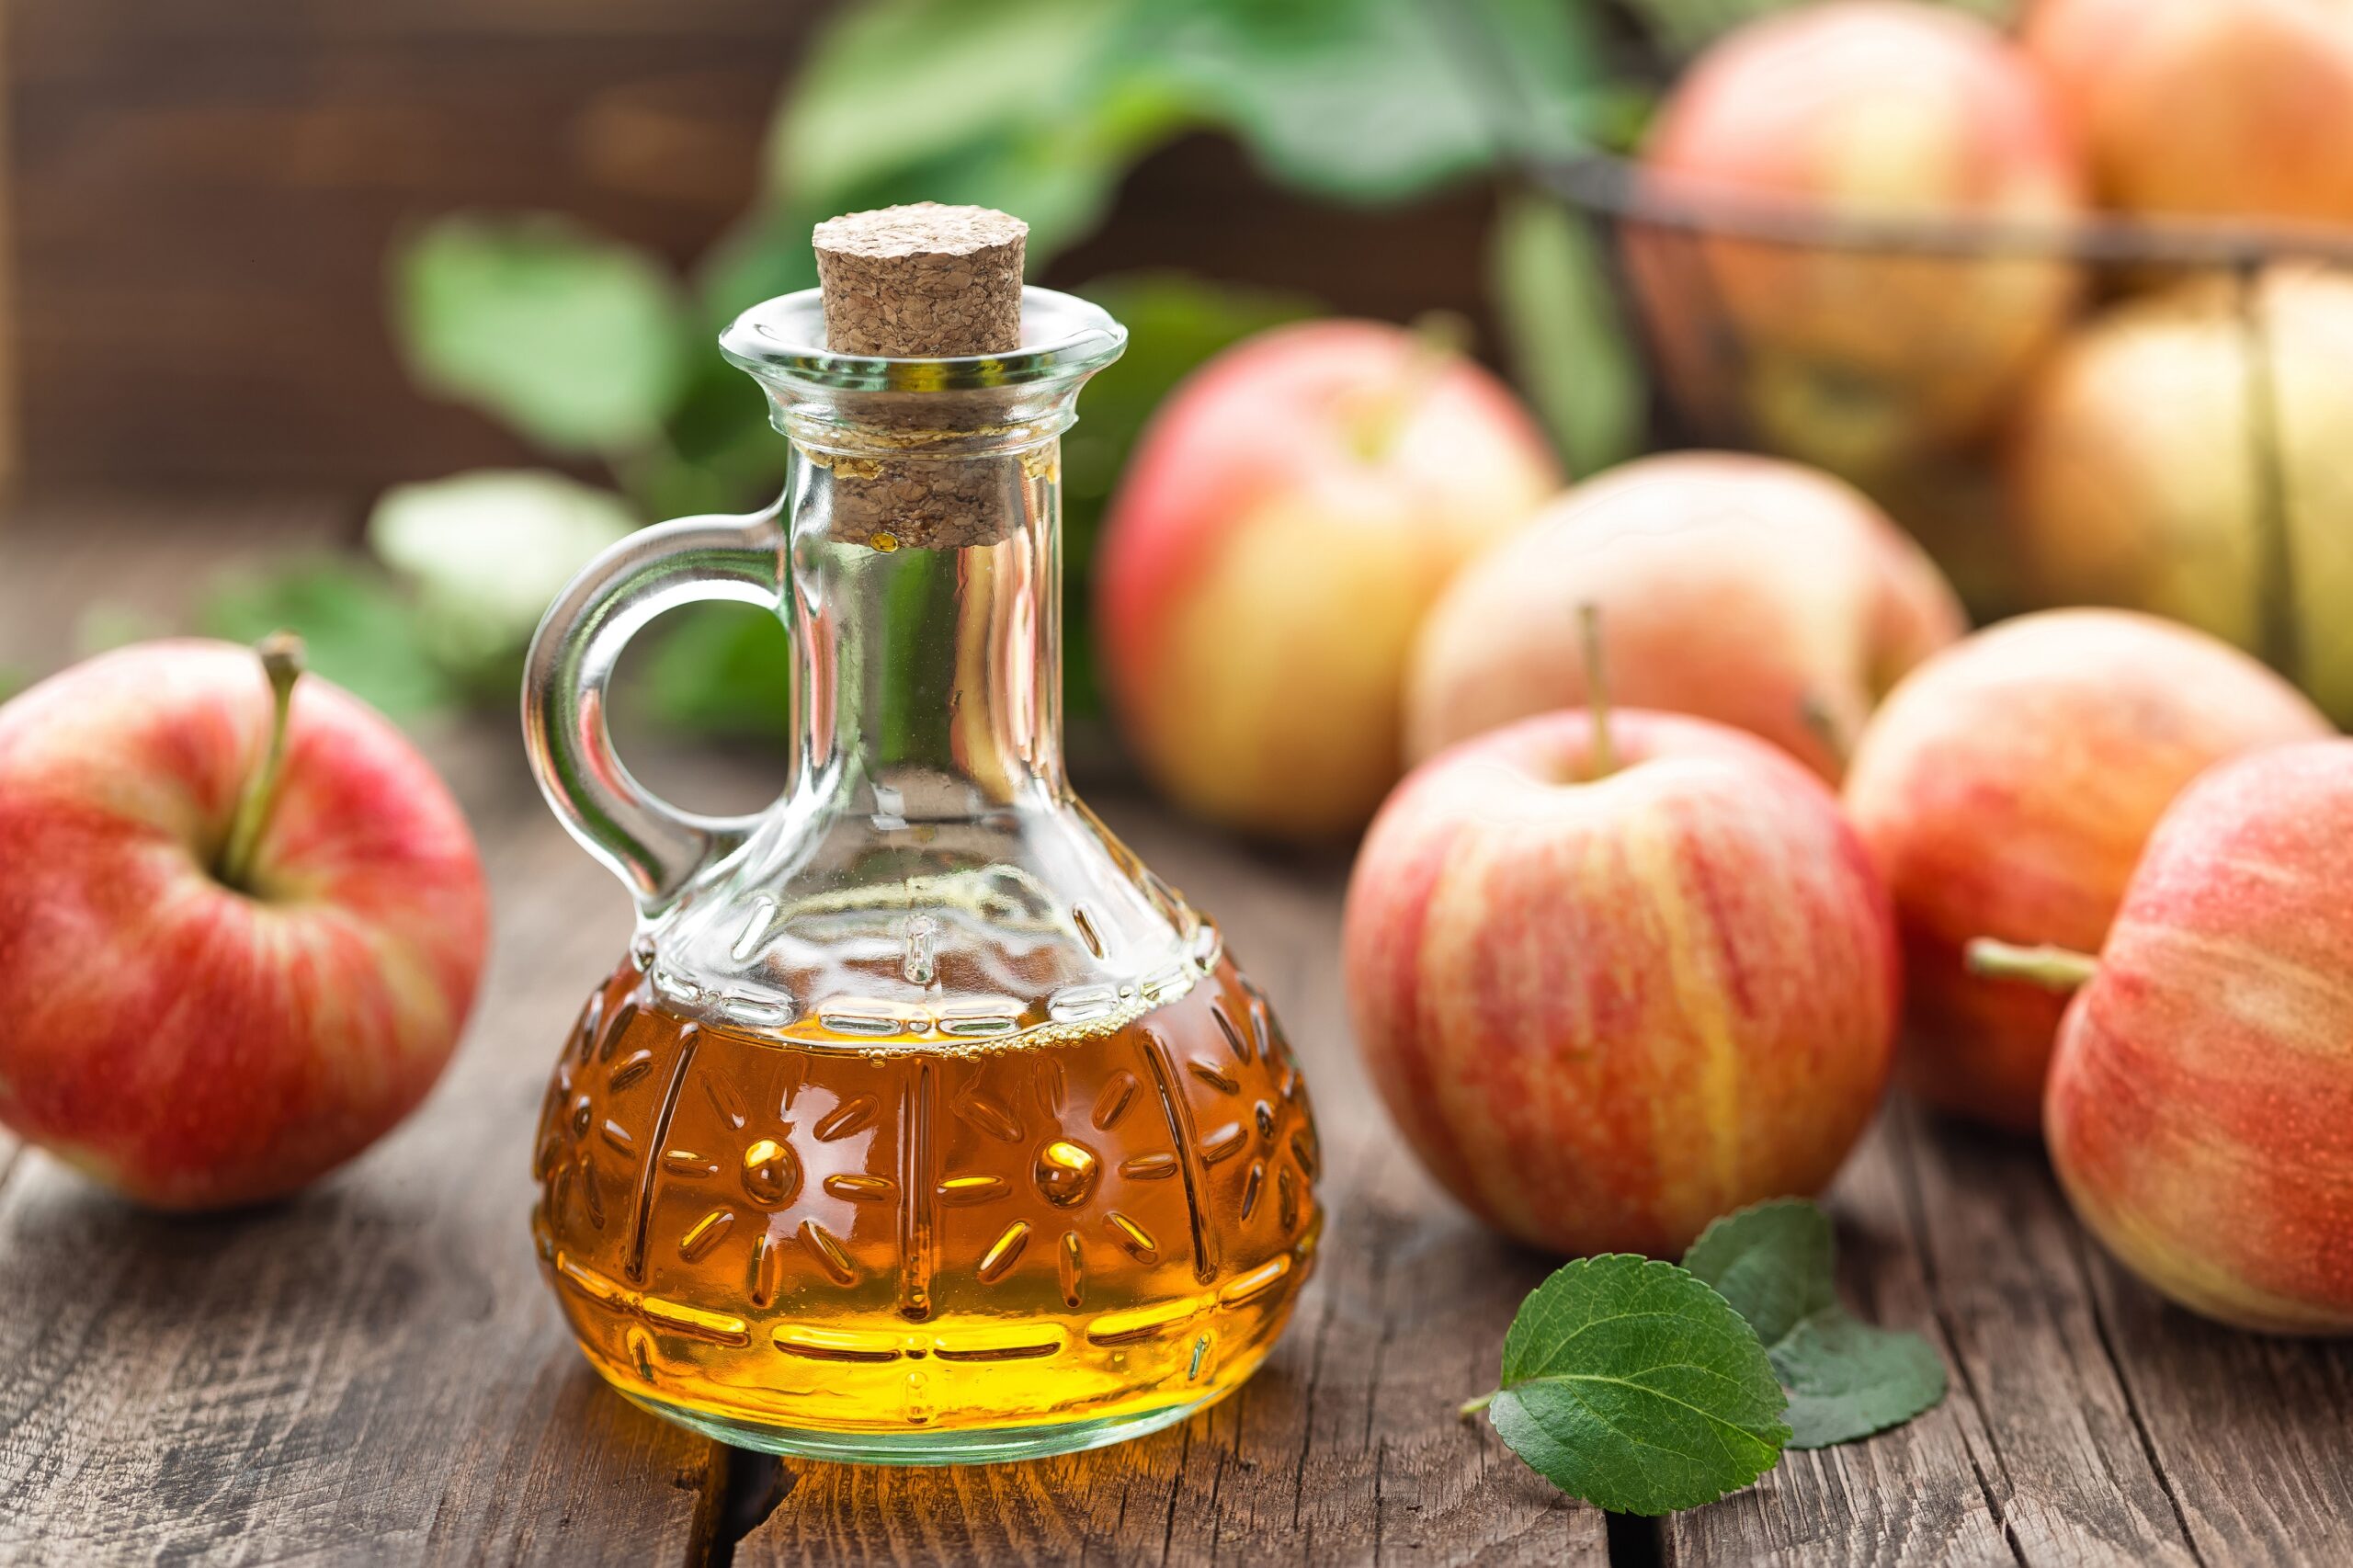 Losing weight with apple cider vinegar – body fat percentage decreases demonstrably